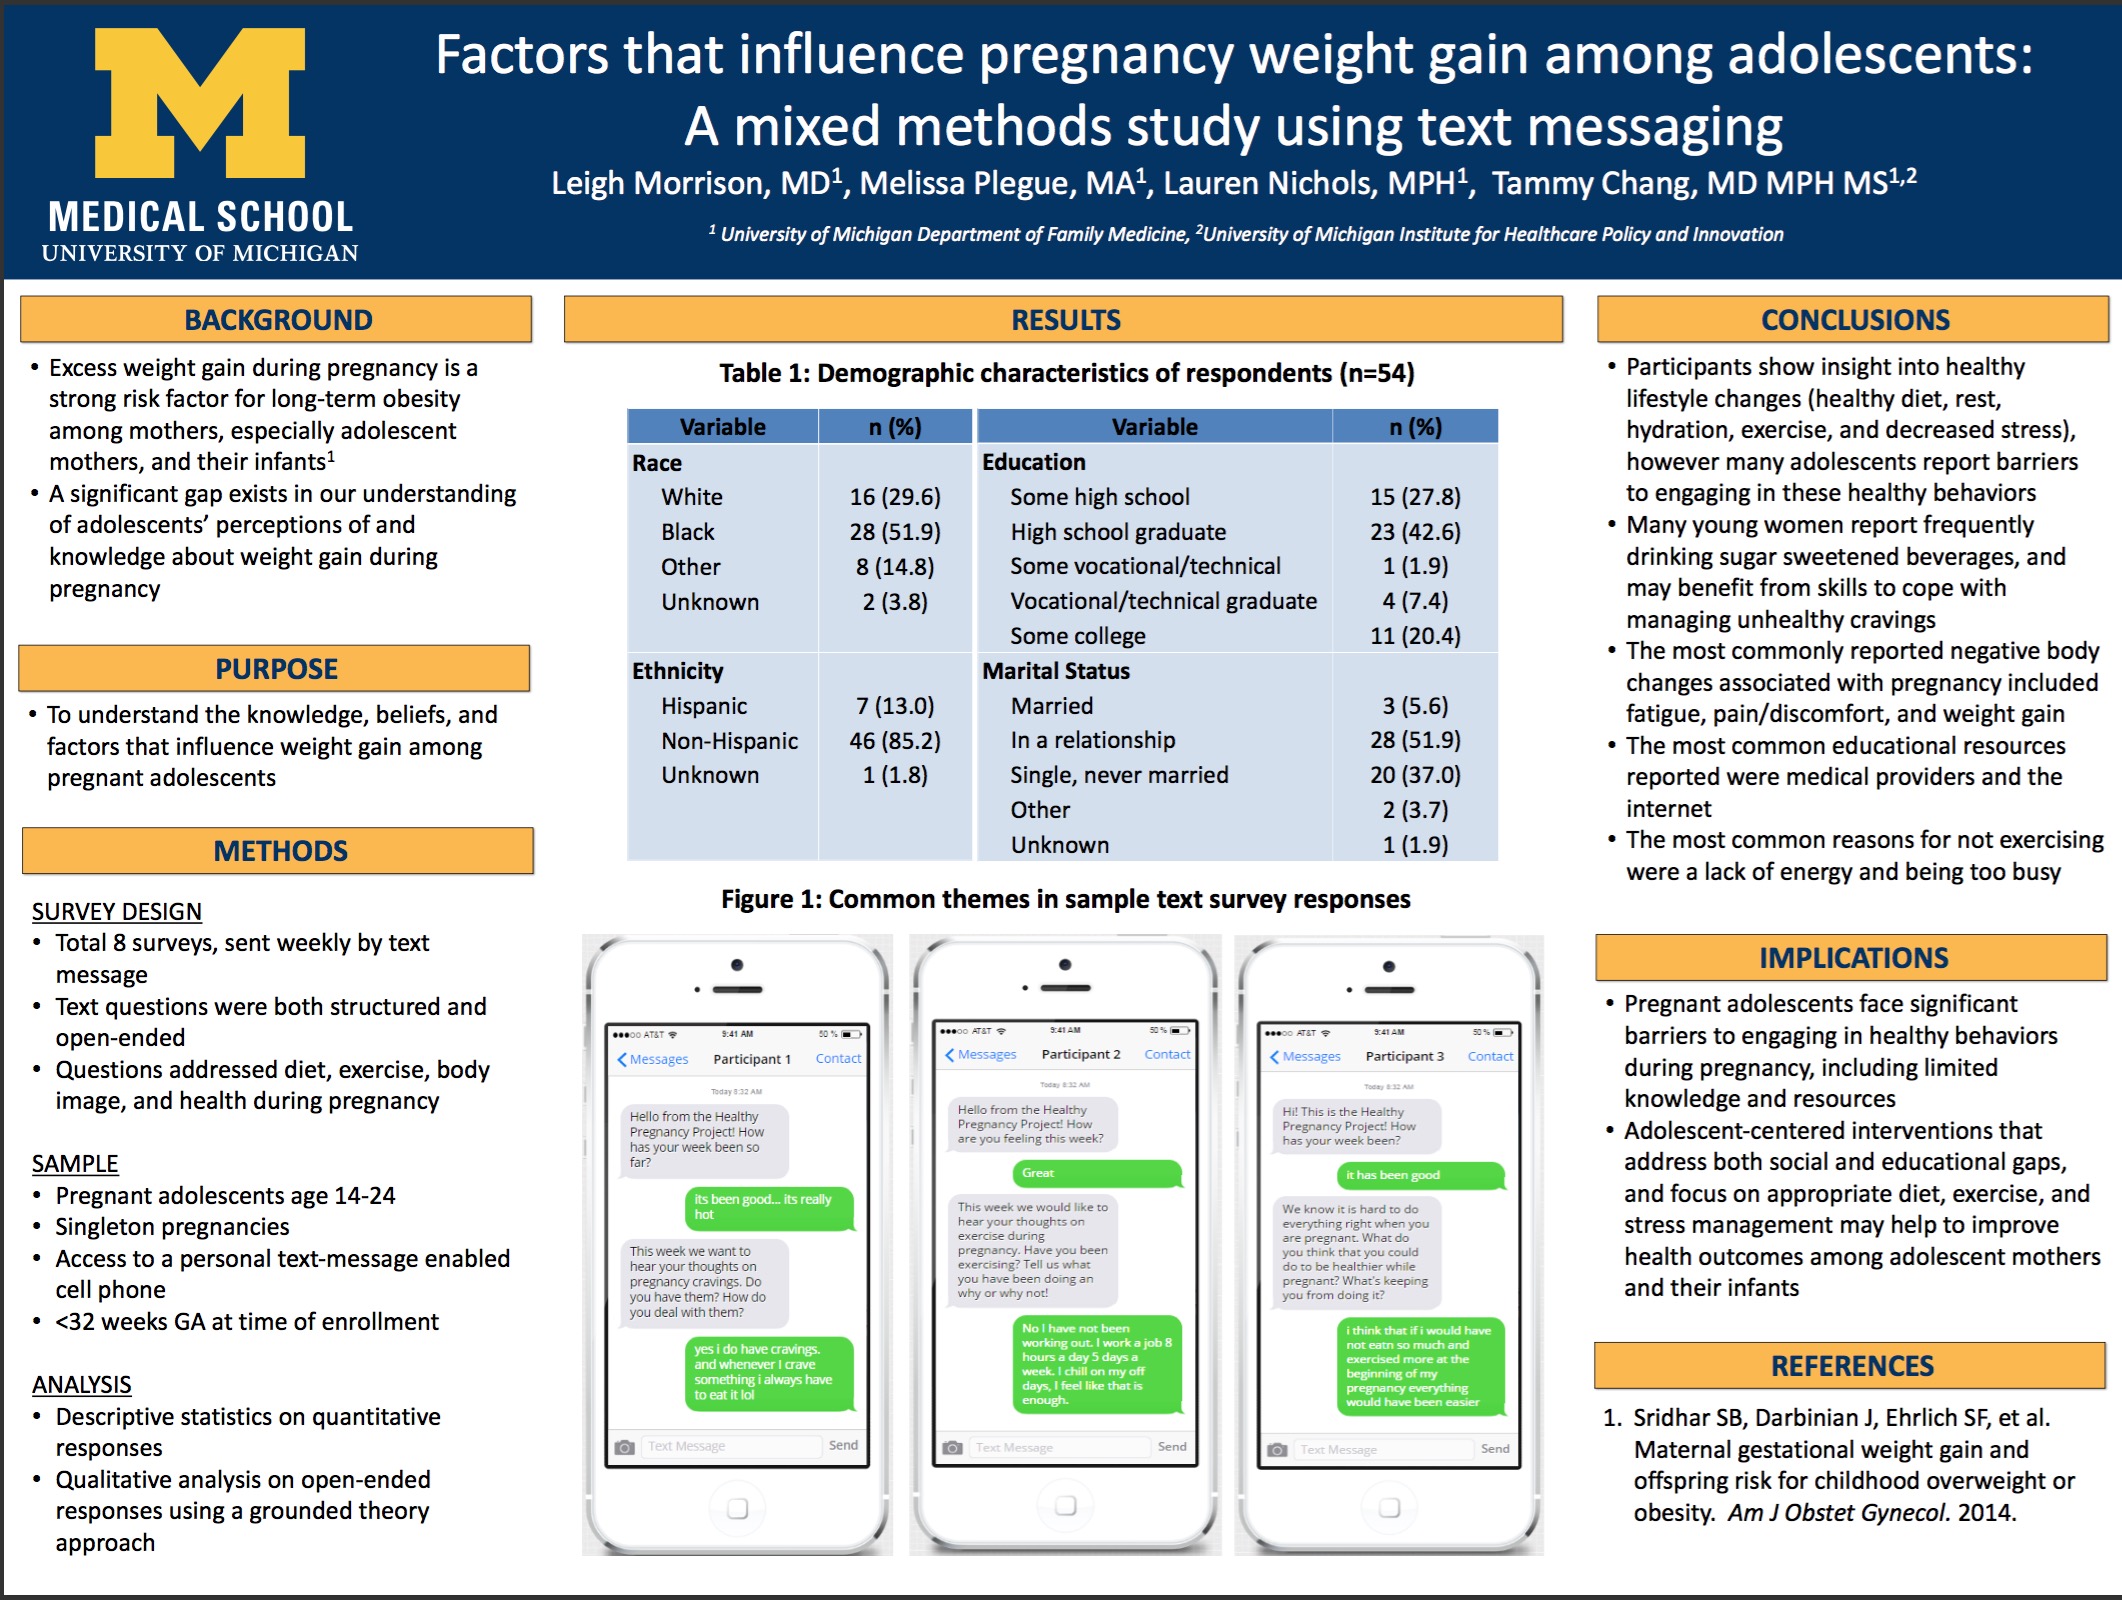 STFM 2017 conference poster by Dr. Leigh Morrison et al on Factors that influence pregnancy weight gain among adolescents: A mixed methods study using text messaging